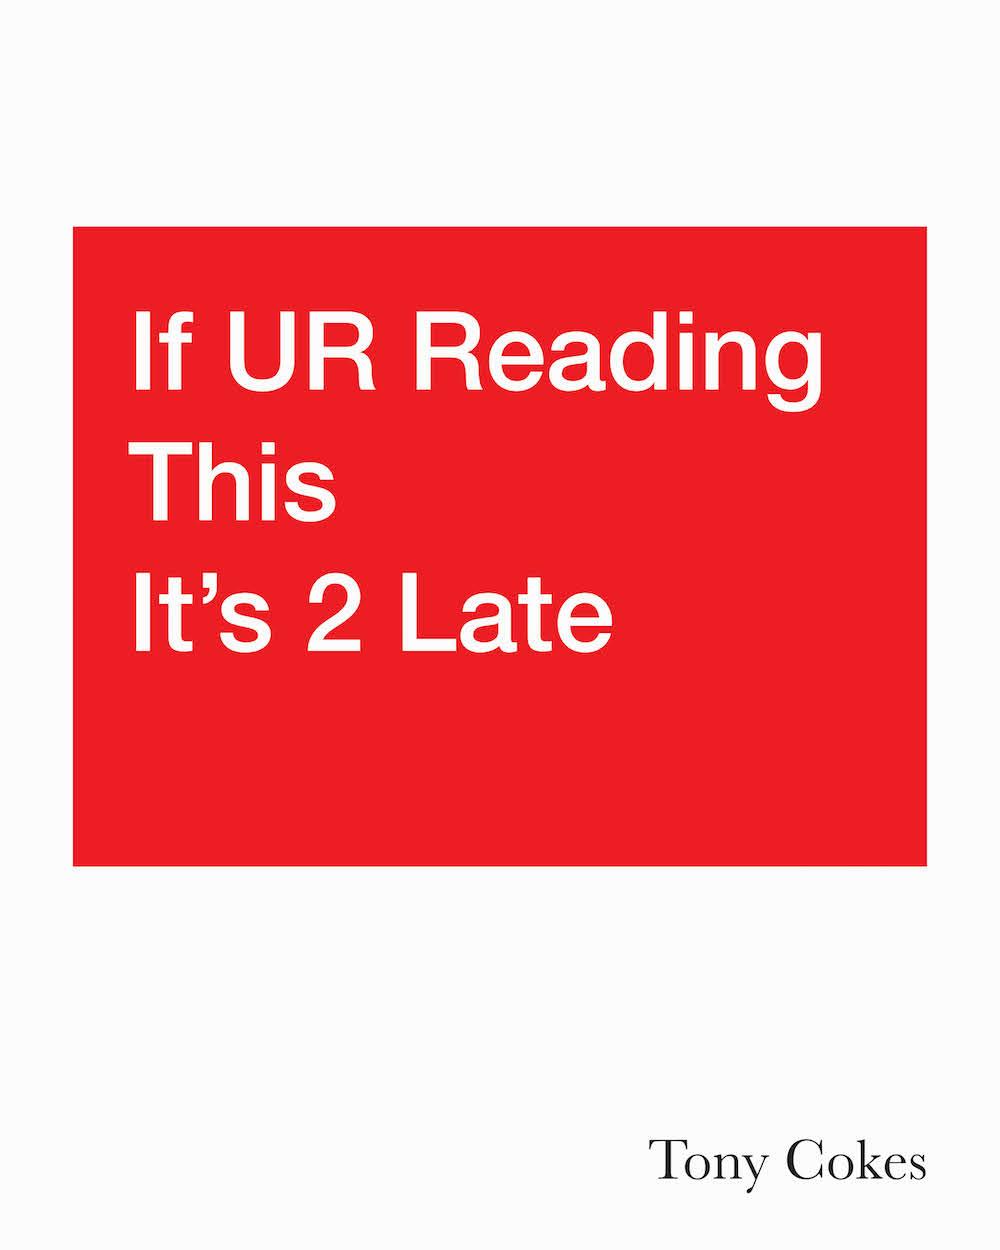 Book cover of  If UR Reading This It's 2 Late: Vol. 1-3